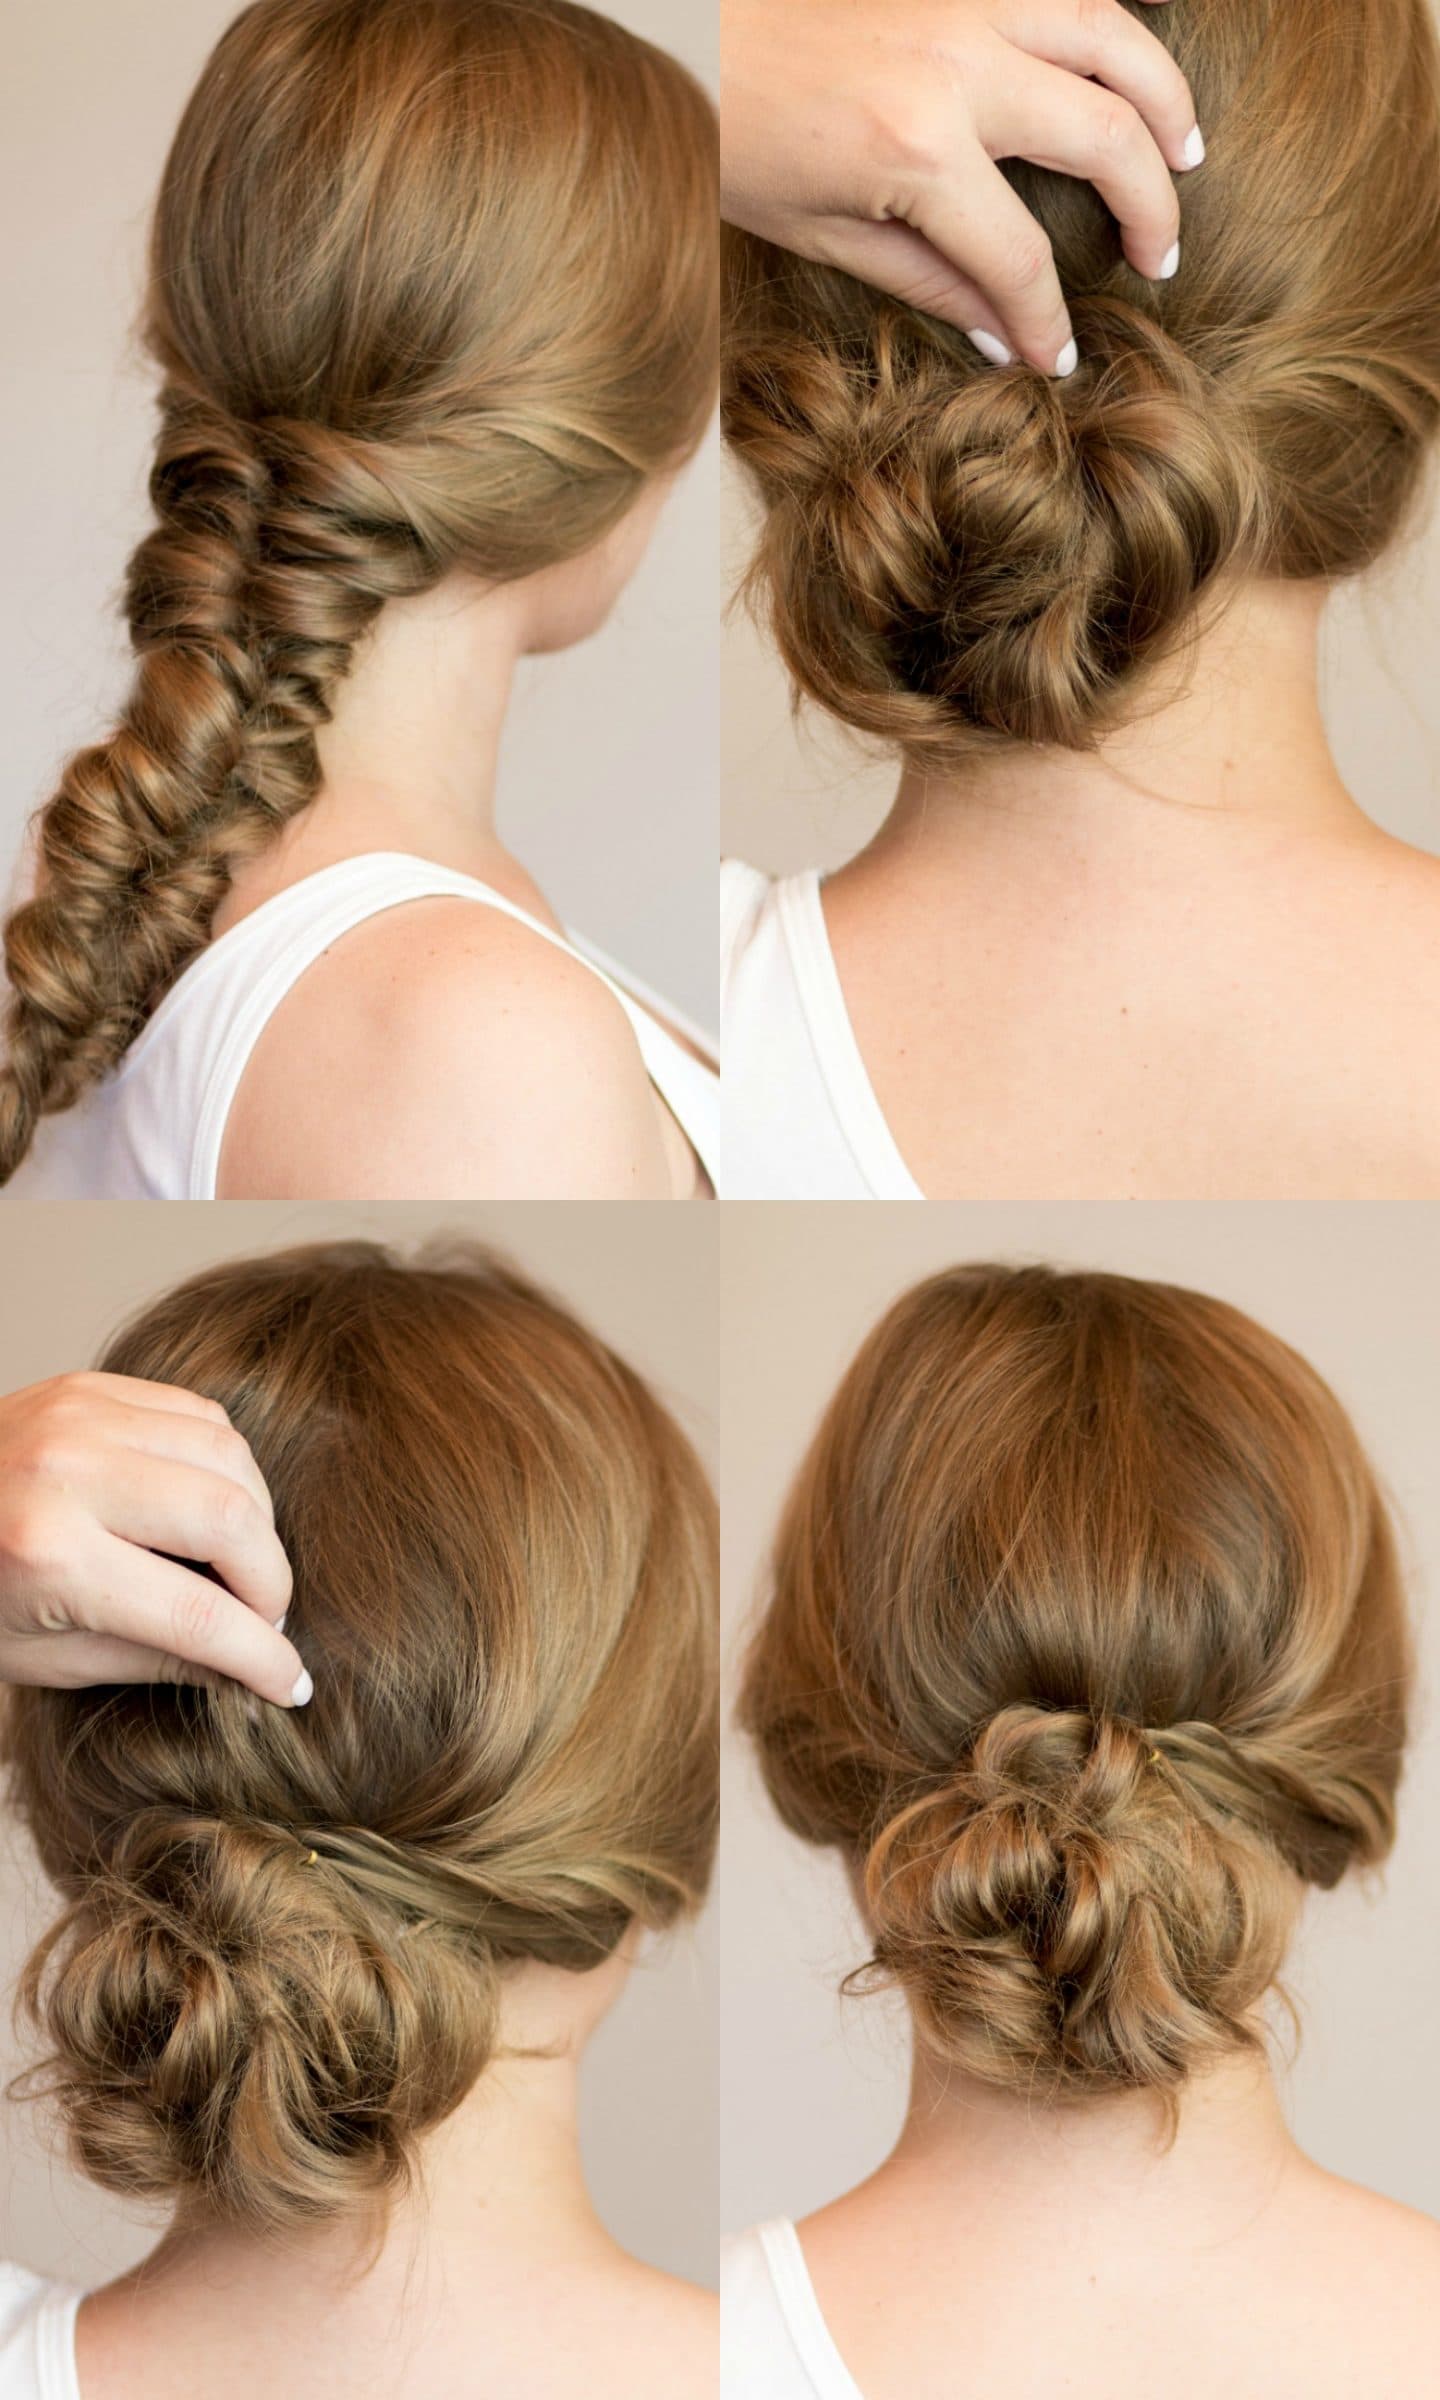 Easy messy braided bun hair tutorial | 4 Easy heatless hairstyles for long hair that don't require hair styling skills or braiding! Learn how to create a faux braided ponytail, messy faux fishtail braid, twisted half-up, and messy braided bun in these easy hair tutorial by Orlando, Florida beauty blogger Ashley Brooke Nicholas! #MyHCLook sponsored by Hair Cuttery | easy hairstyles, no-heat hairstyle, faux braids, faux braid tutorial, how to braid your hair, messy bun, fishtail braid, long dirty blonde hair